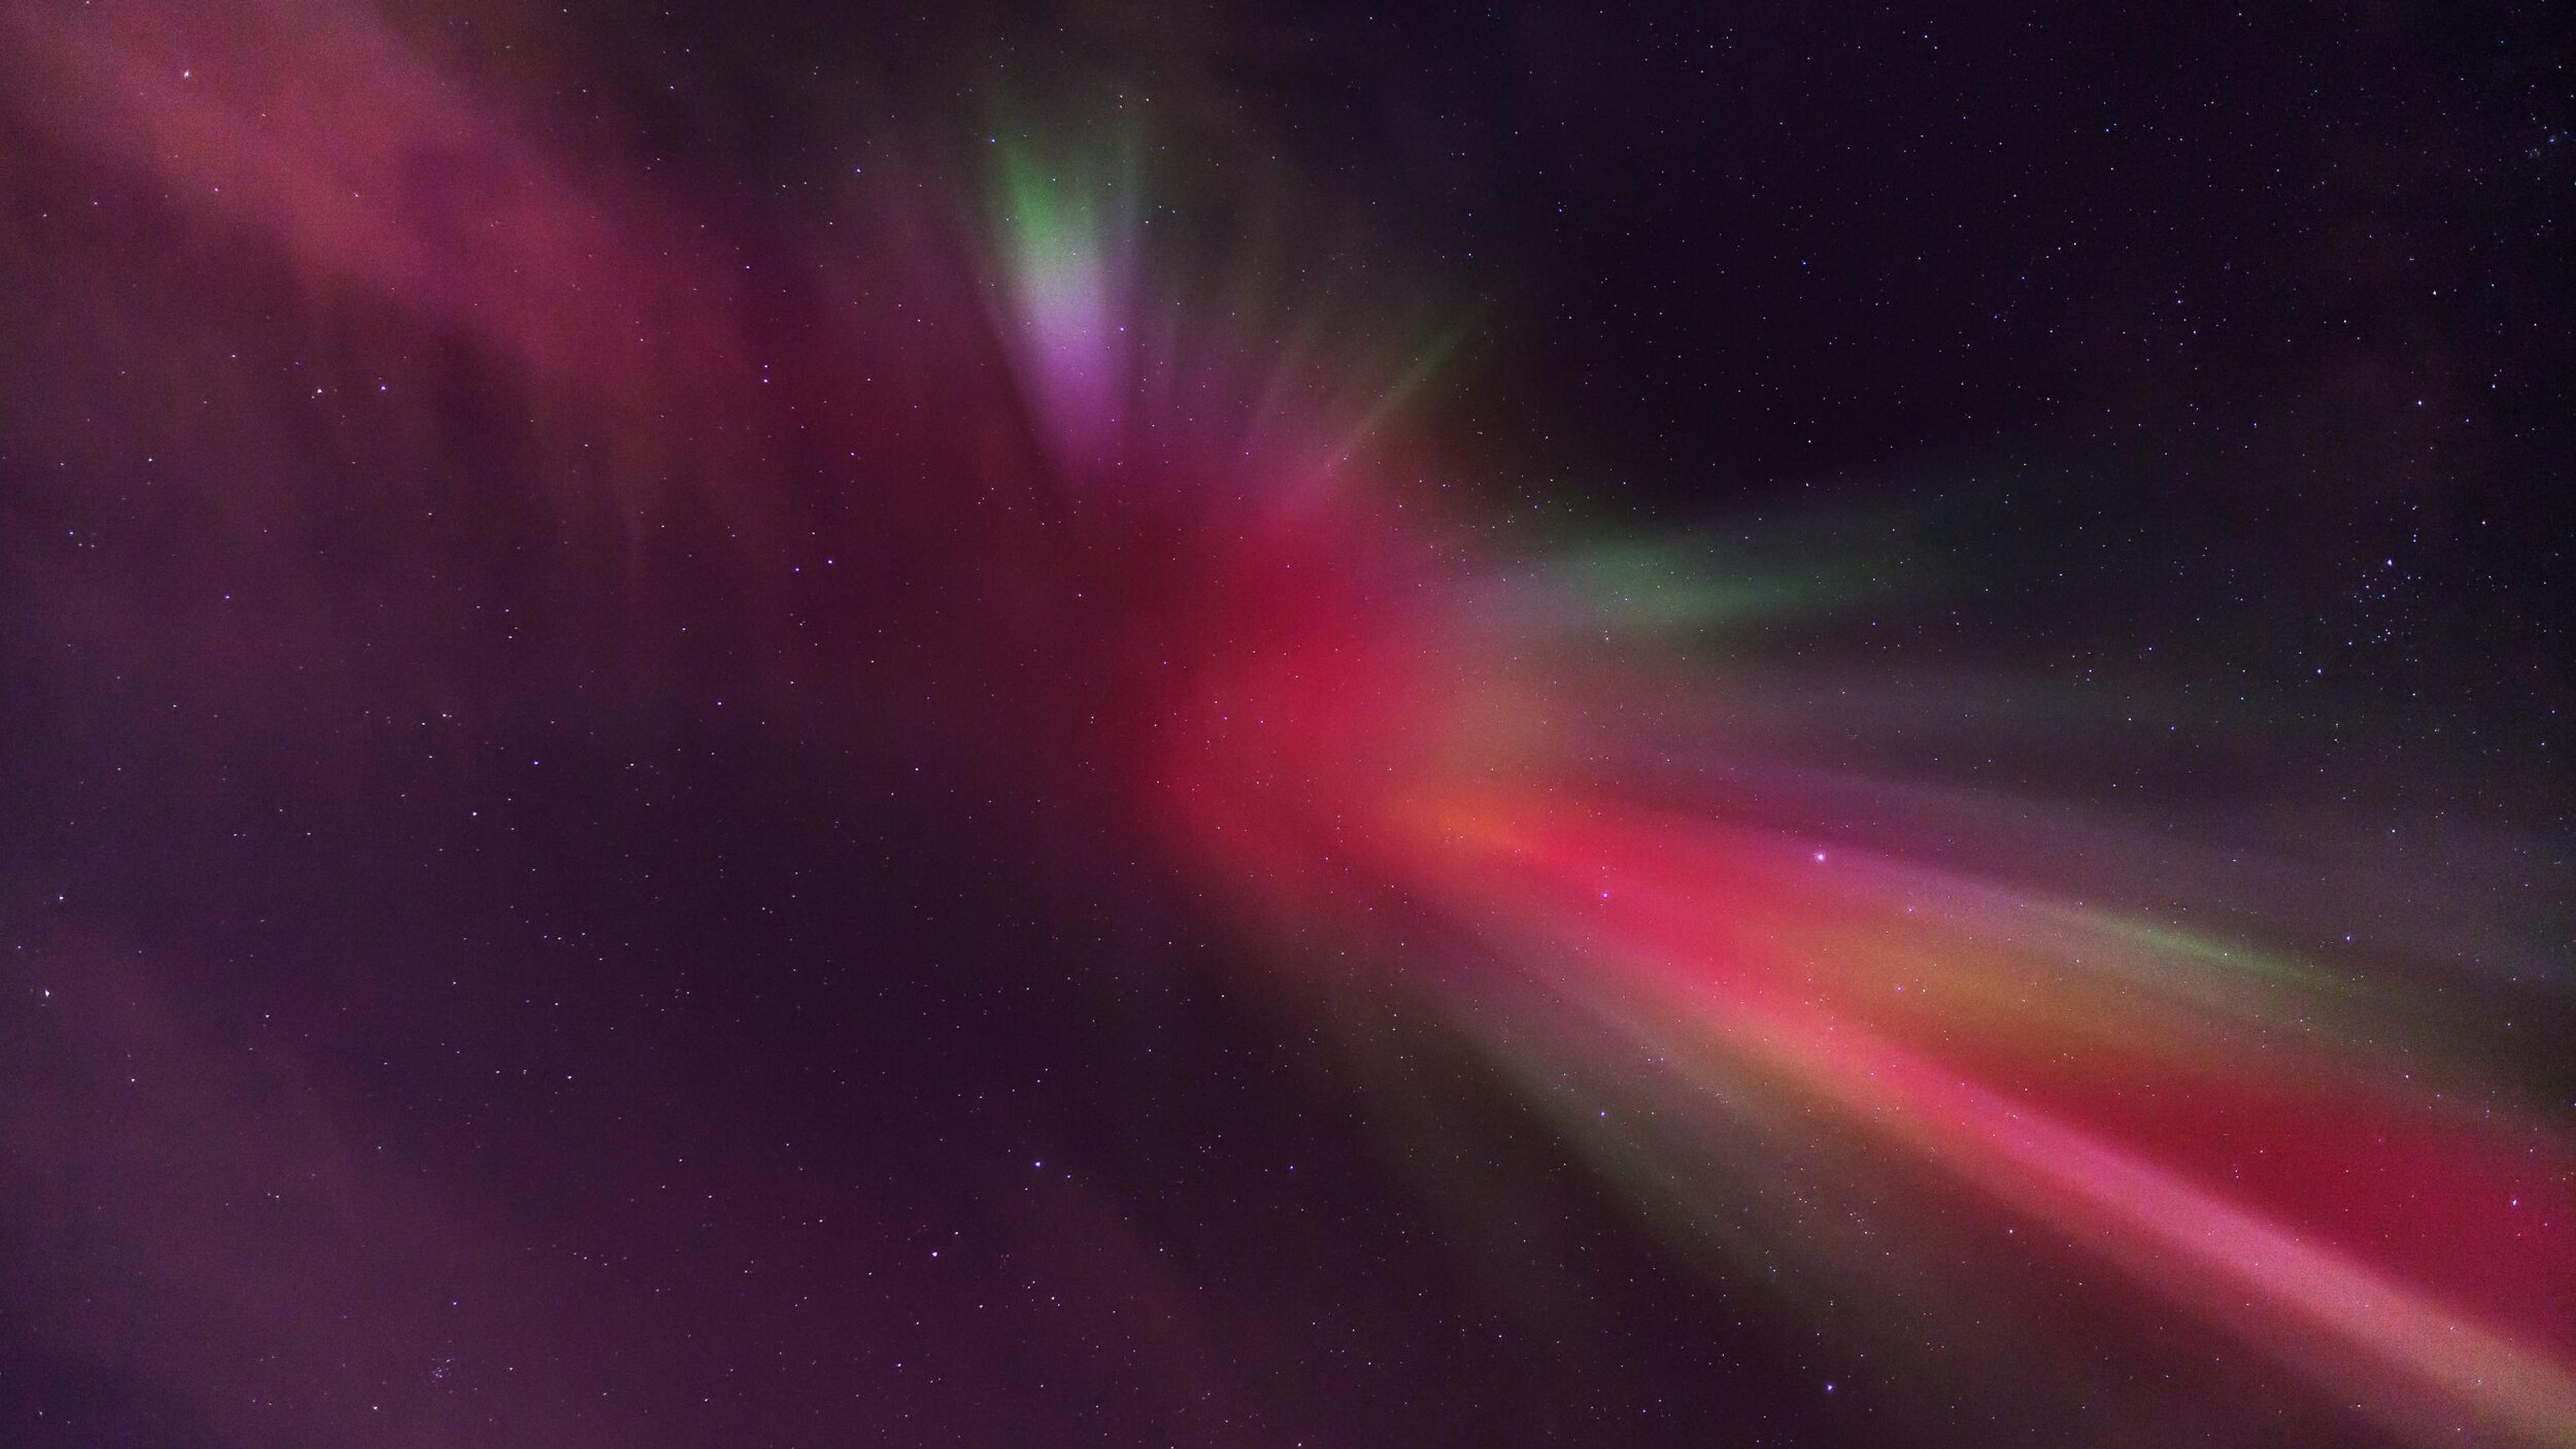 A vibrant display of the Northern Lights in the night sky, featuring streaks of red, green, and pink against a backdrop of stars.